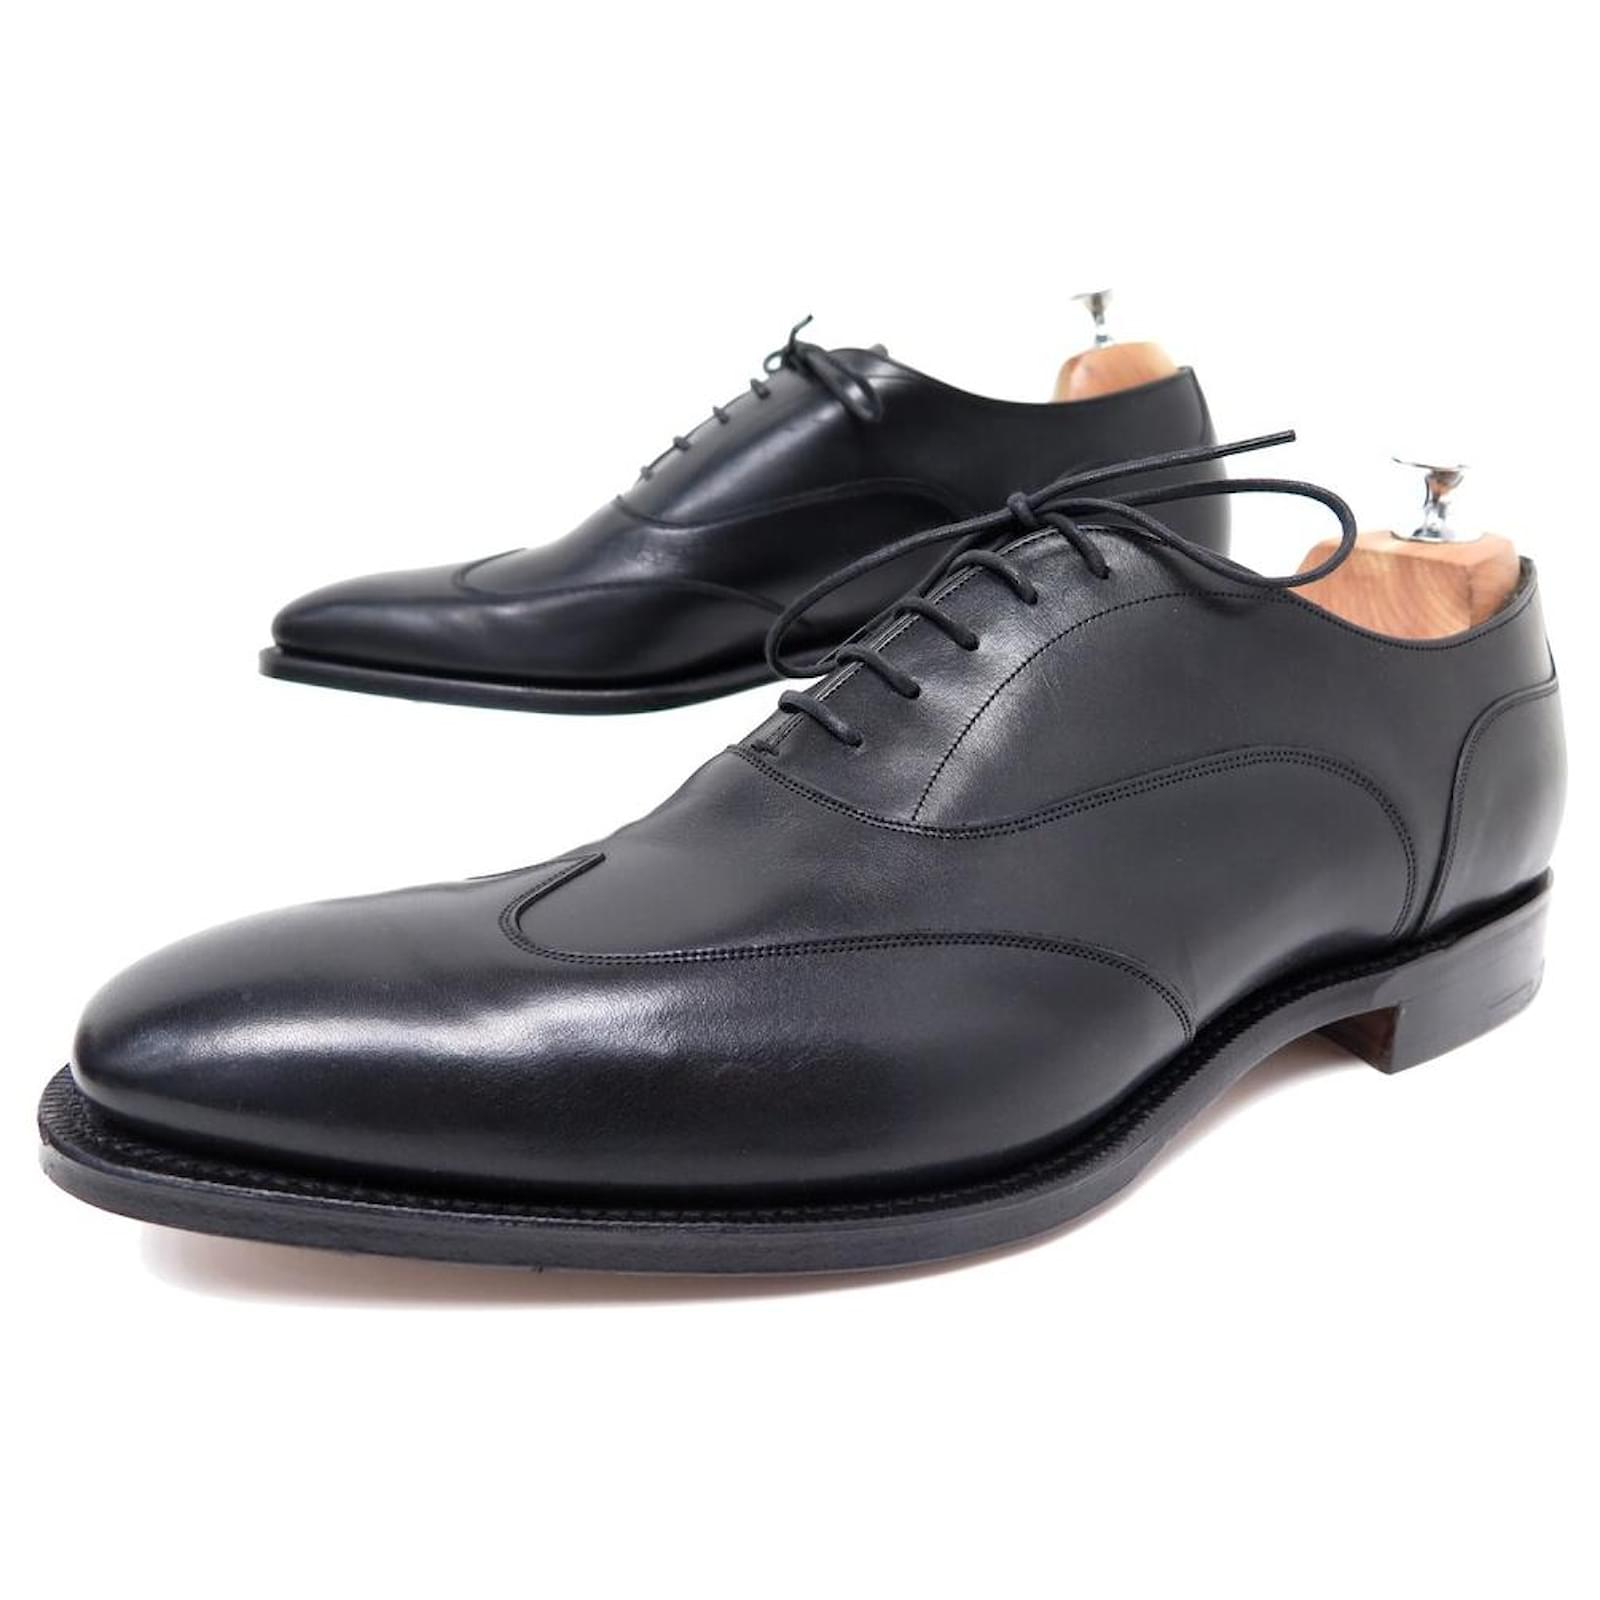 NEW CHURCH'S SHERBORNE RICHELIEU SHOES 9F 43 BLACK LEATHER SHOES ref ...